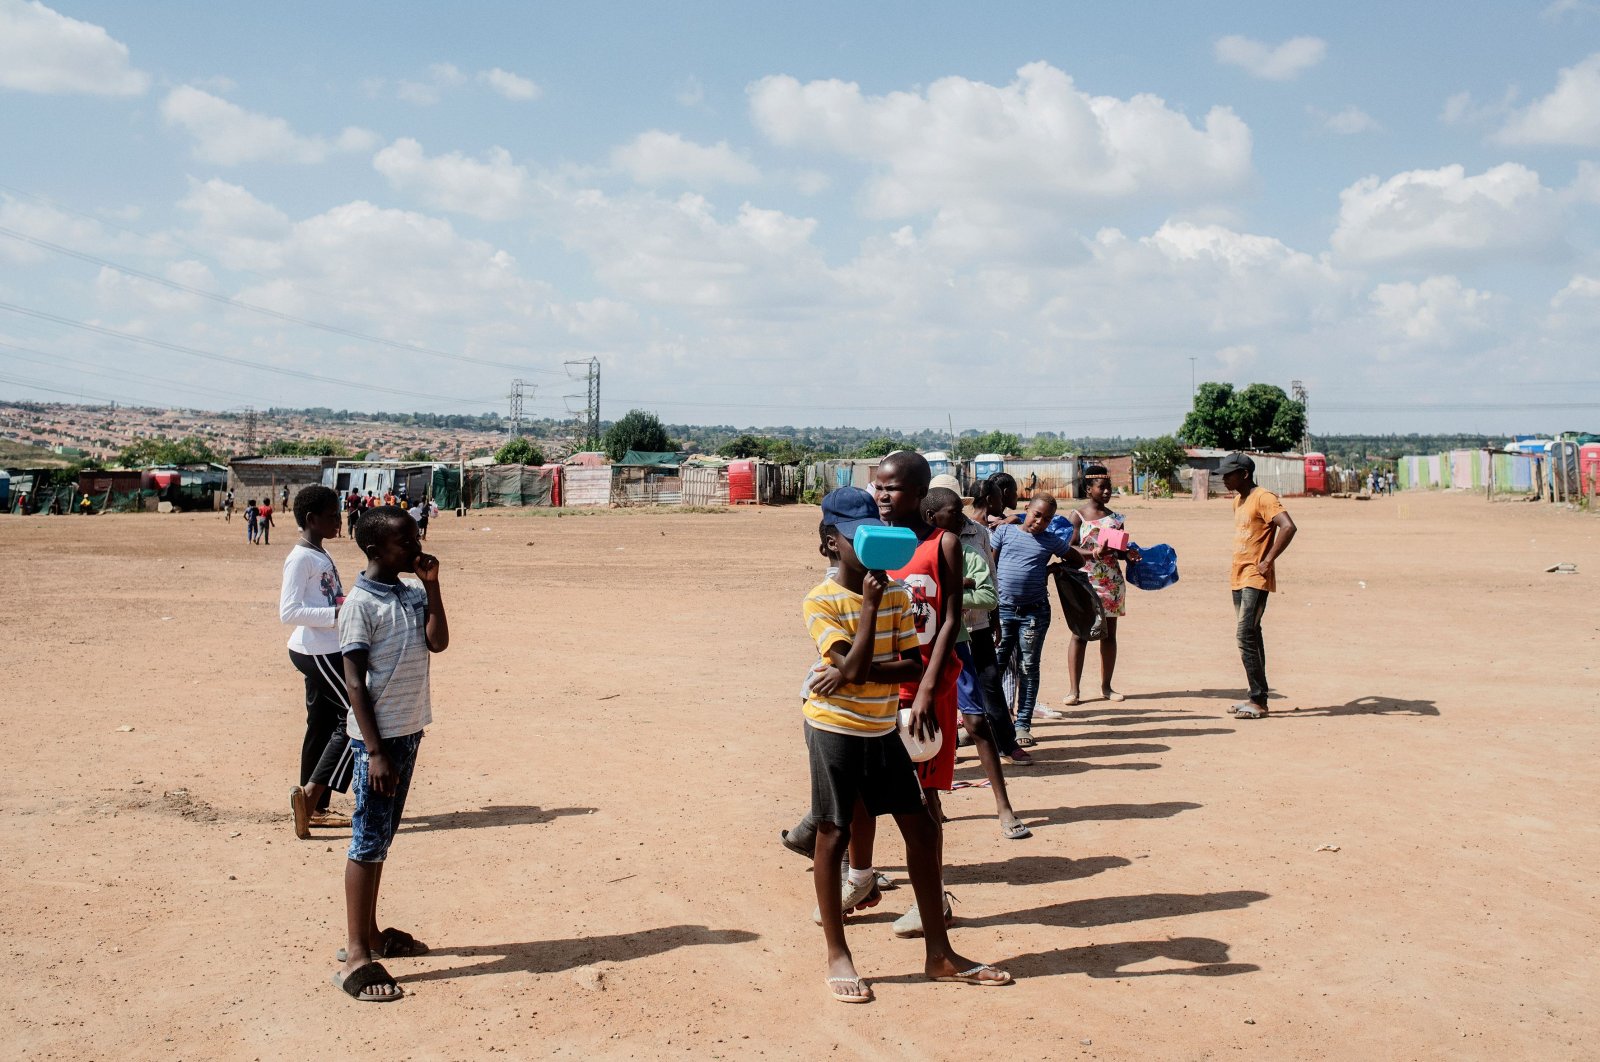 Children queue while they wait for the daily food distribution in the Tembisa informal settlement, Johannesburg on April 24, 2020. (AFP Photo)